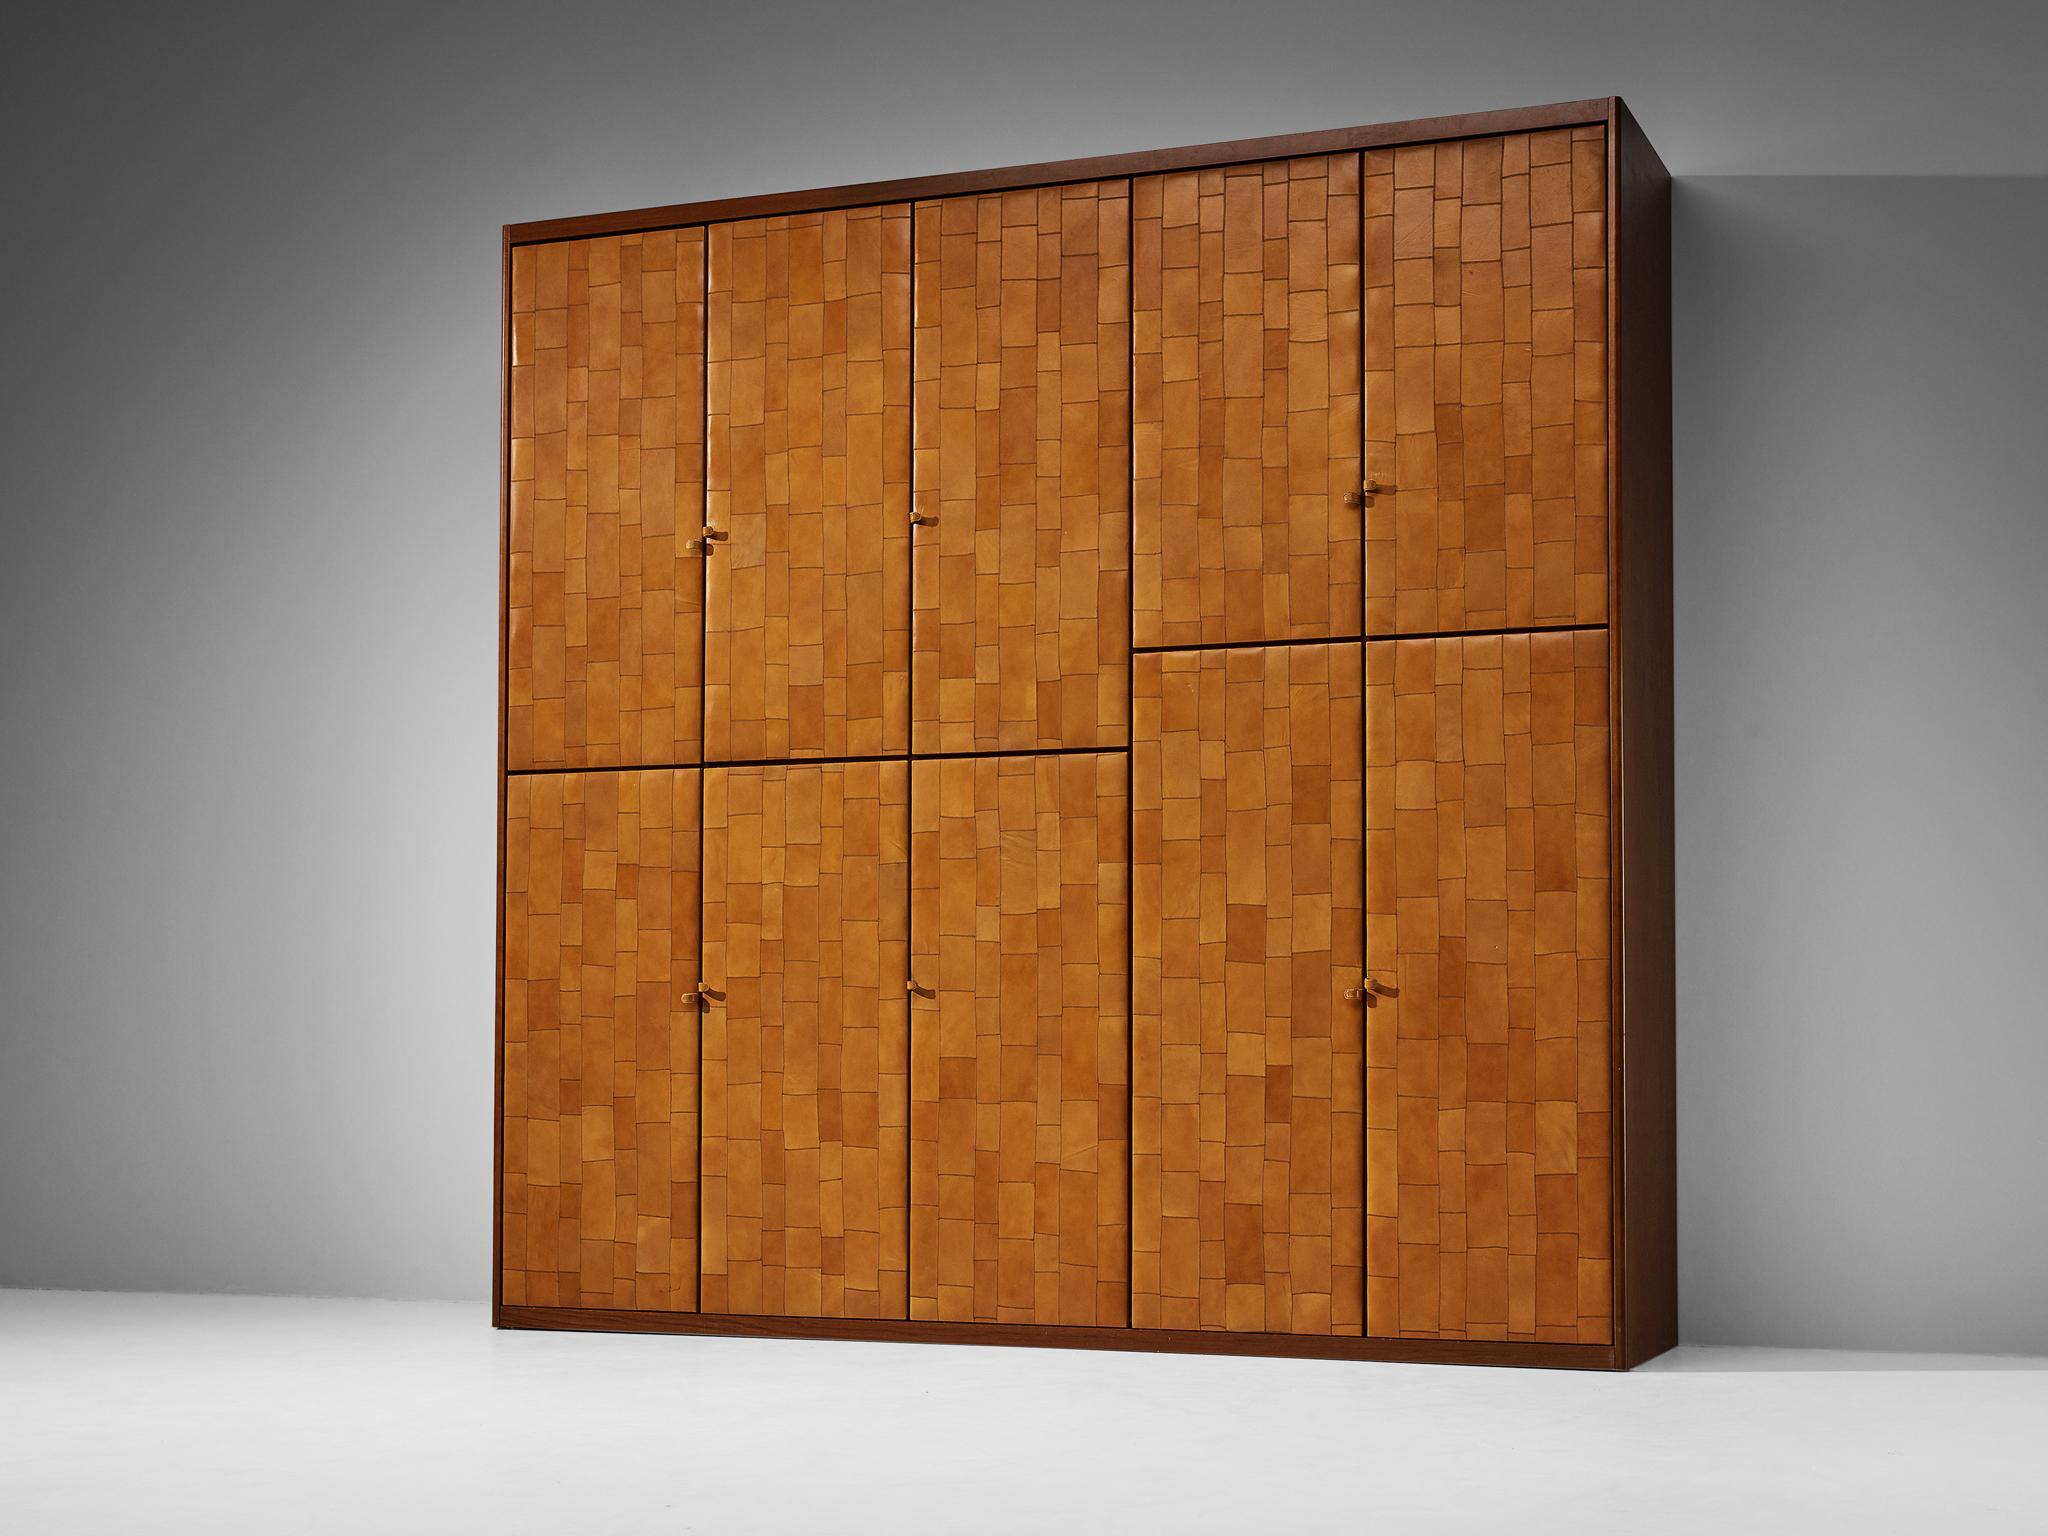 Tito Agnoli for Caleido/Poltrona Frau wardrobe, patchwork cognac leather, stained birch, metal, Italy, 1970s.

This is an eye-catching and rare wardrobe that is designed by Tito Agnoli for Caleido, another company by Poltrona Frau. This piece is